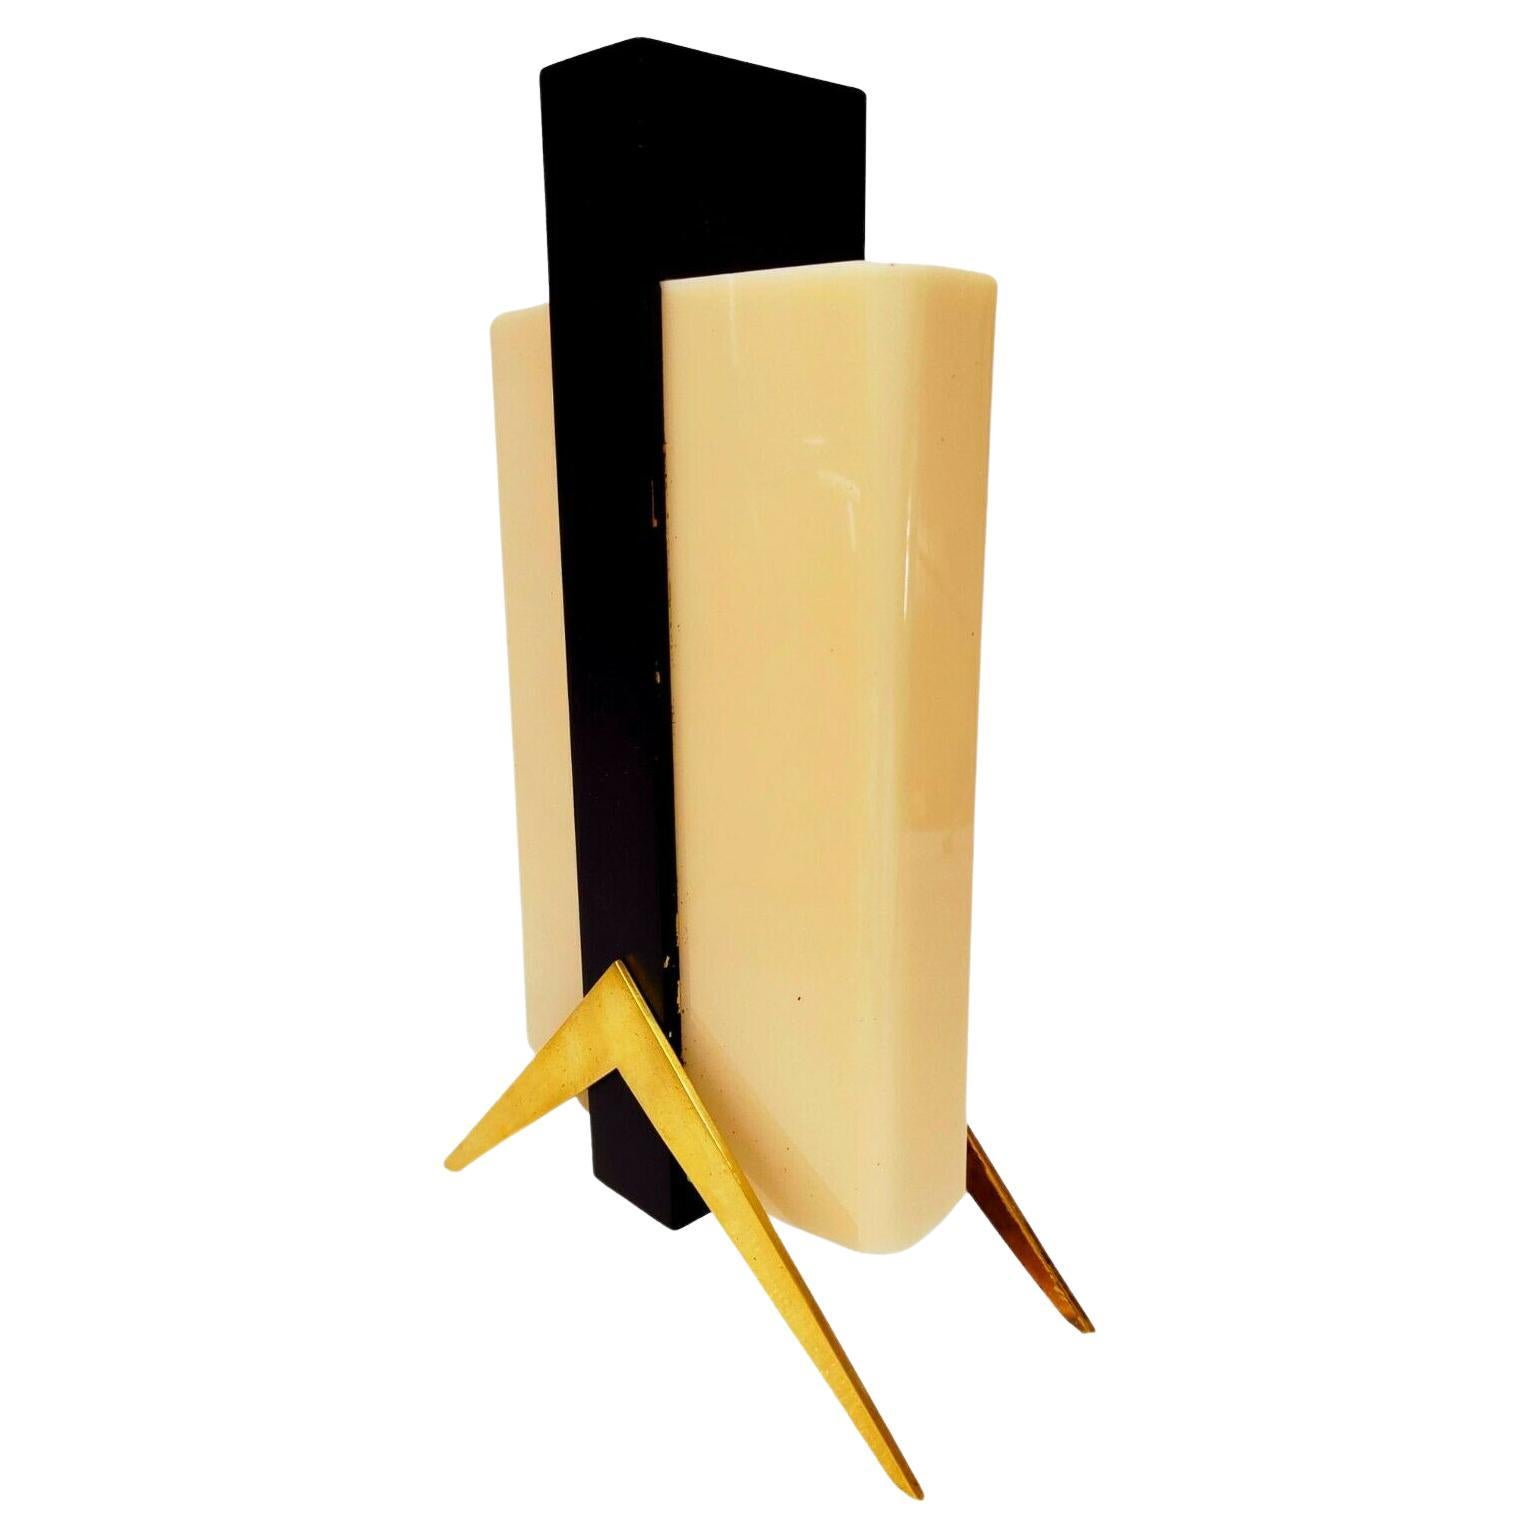 Vintage Table Lamp, Gio Ponti Style, in Plexiglass and Brass, 1960s